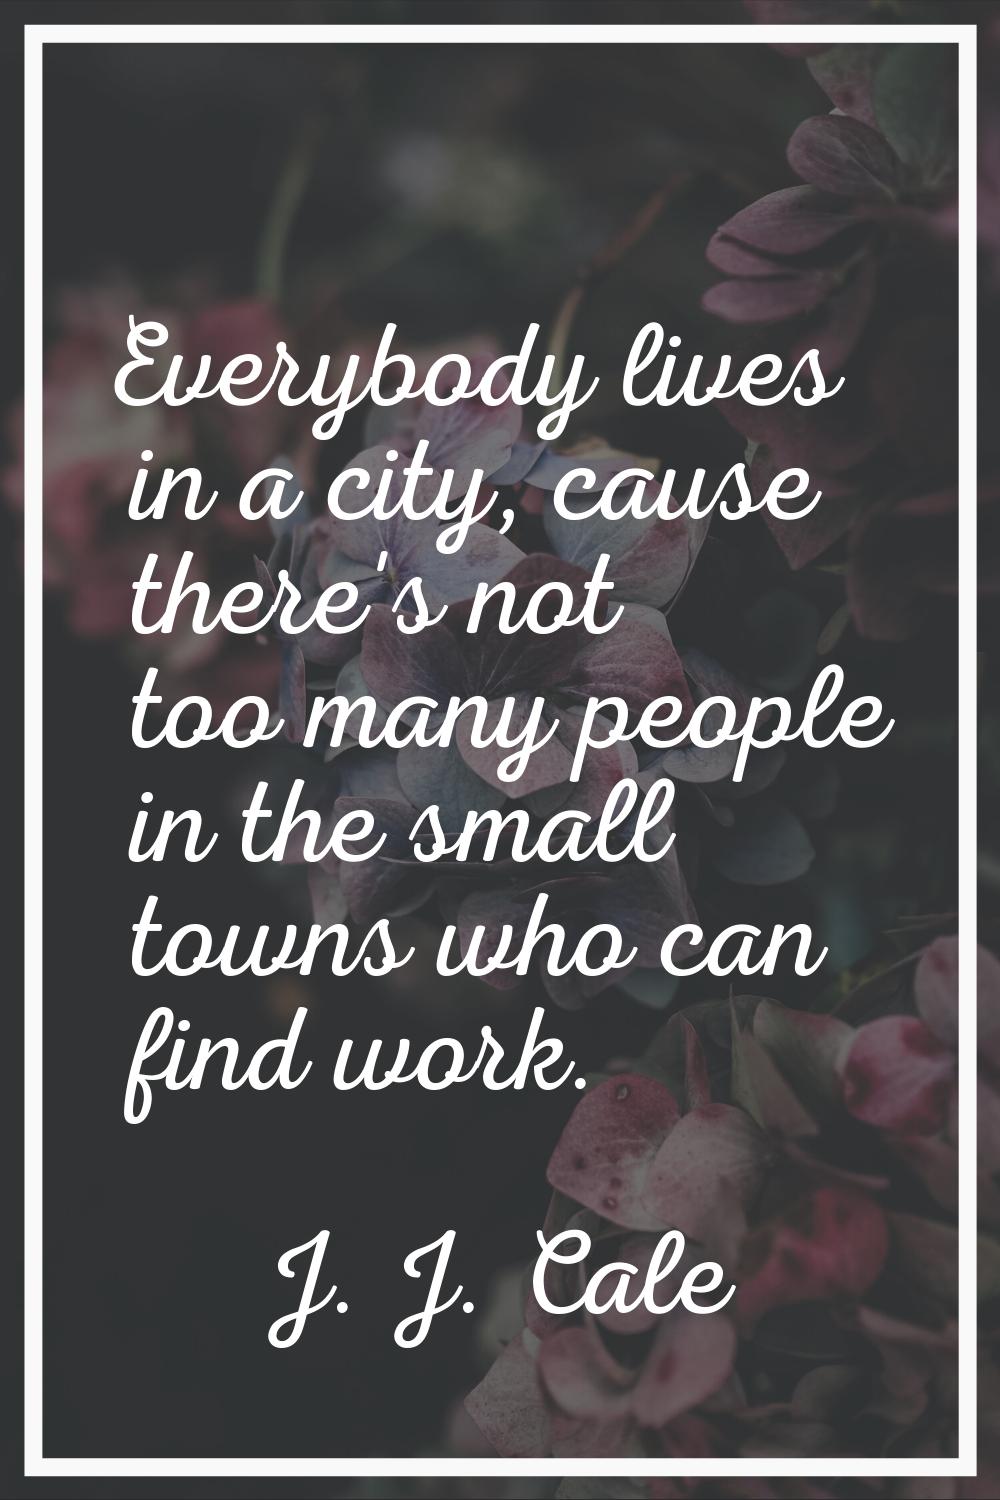 Everybody lives in a city, cause there's not too many people in the small towns who can find work.